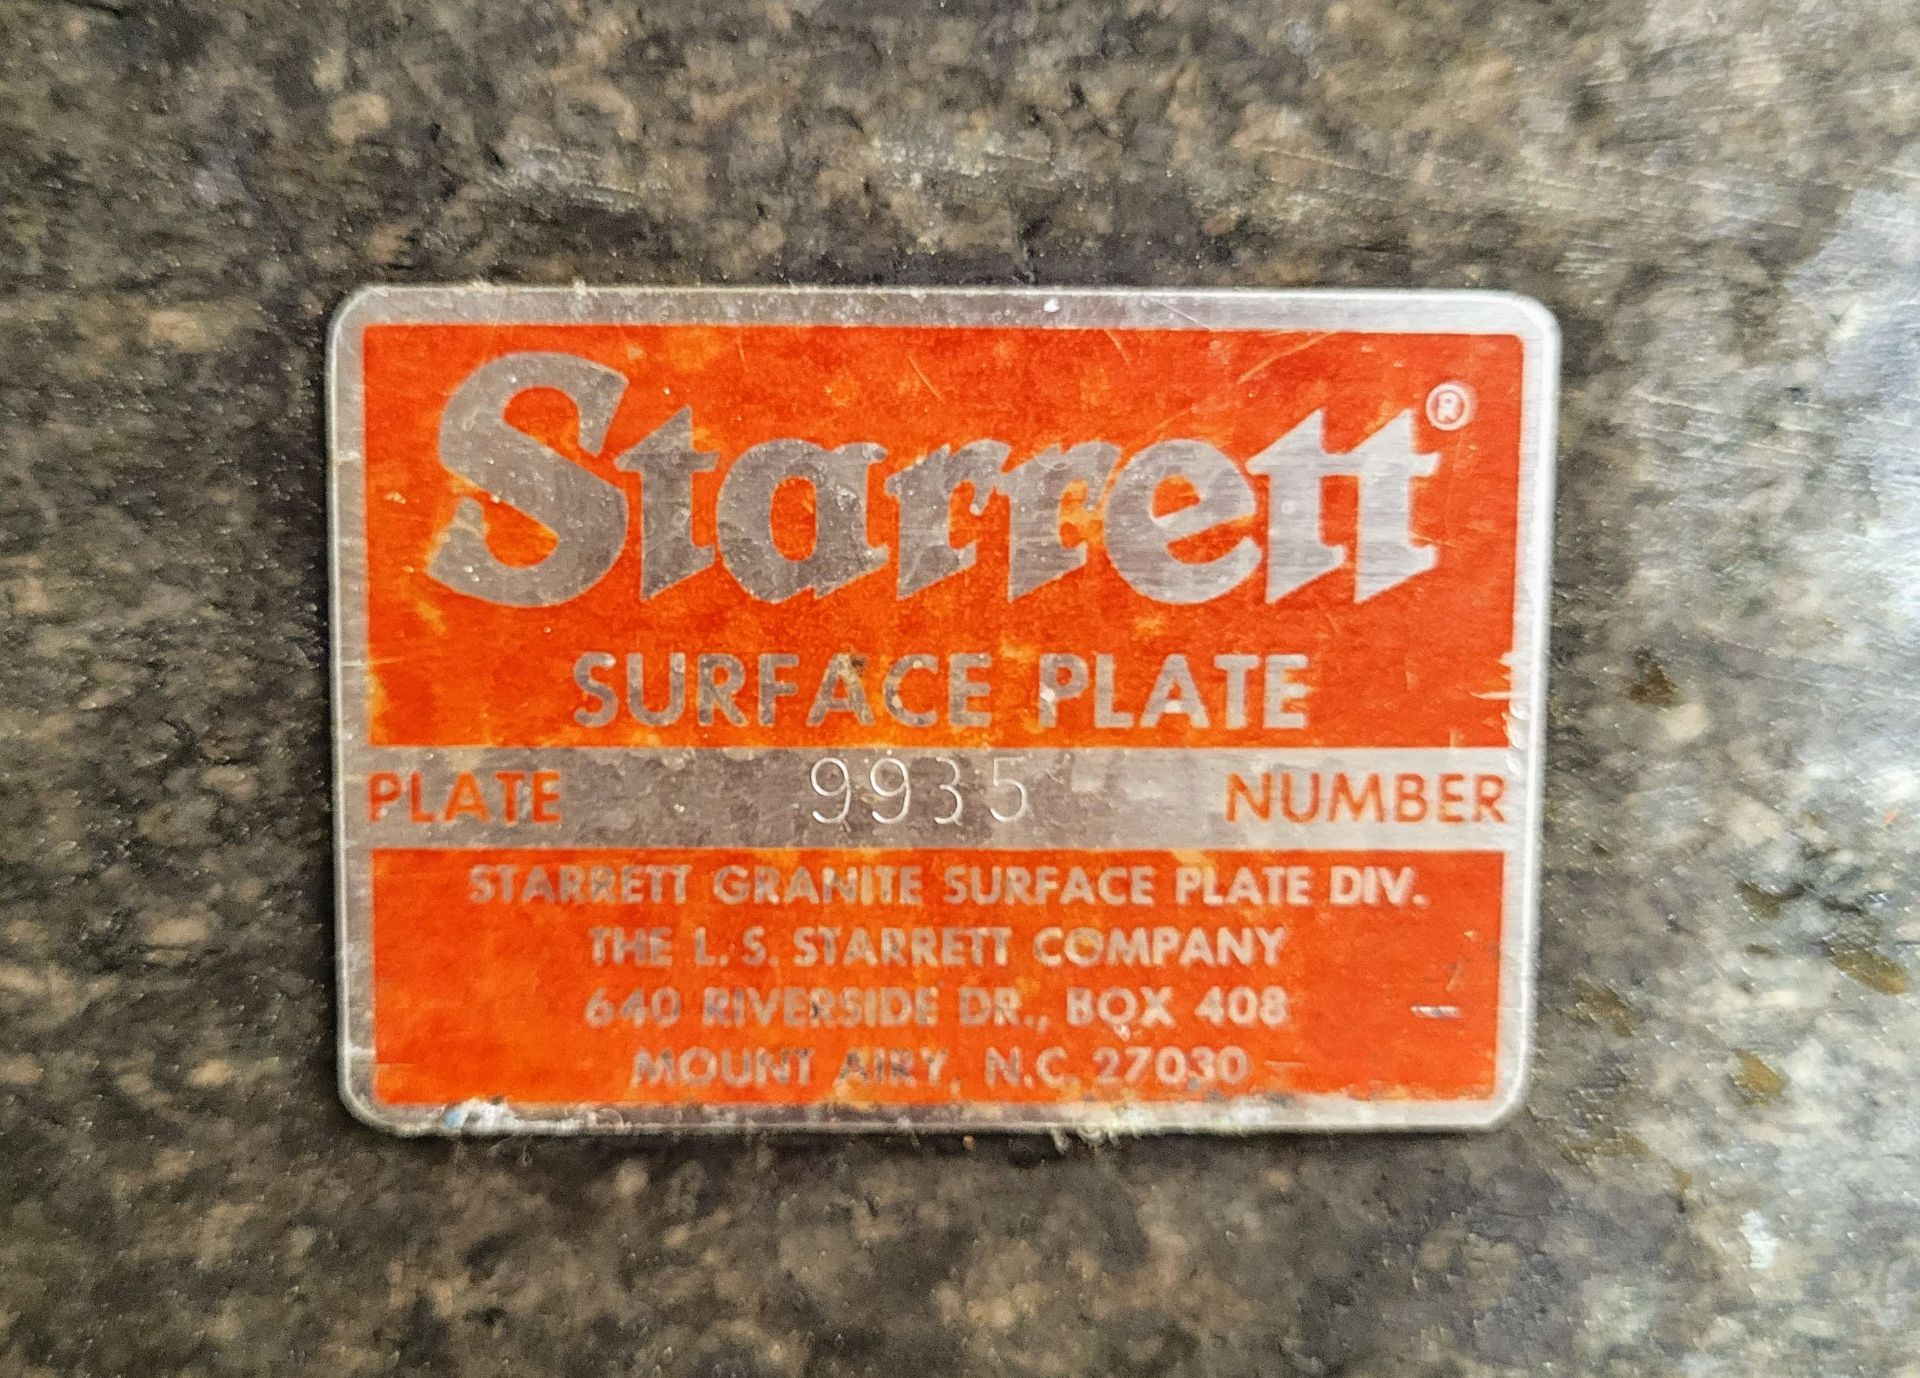 OPTICOM QUALIFIER 30 OPTICAL COMPARATOR AND STARRET SURFACE PLATE - Image 8 of 9